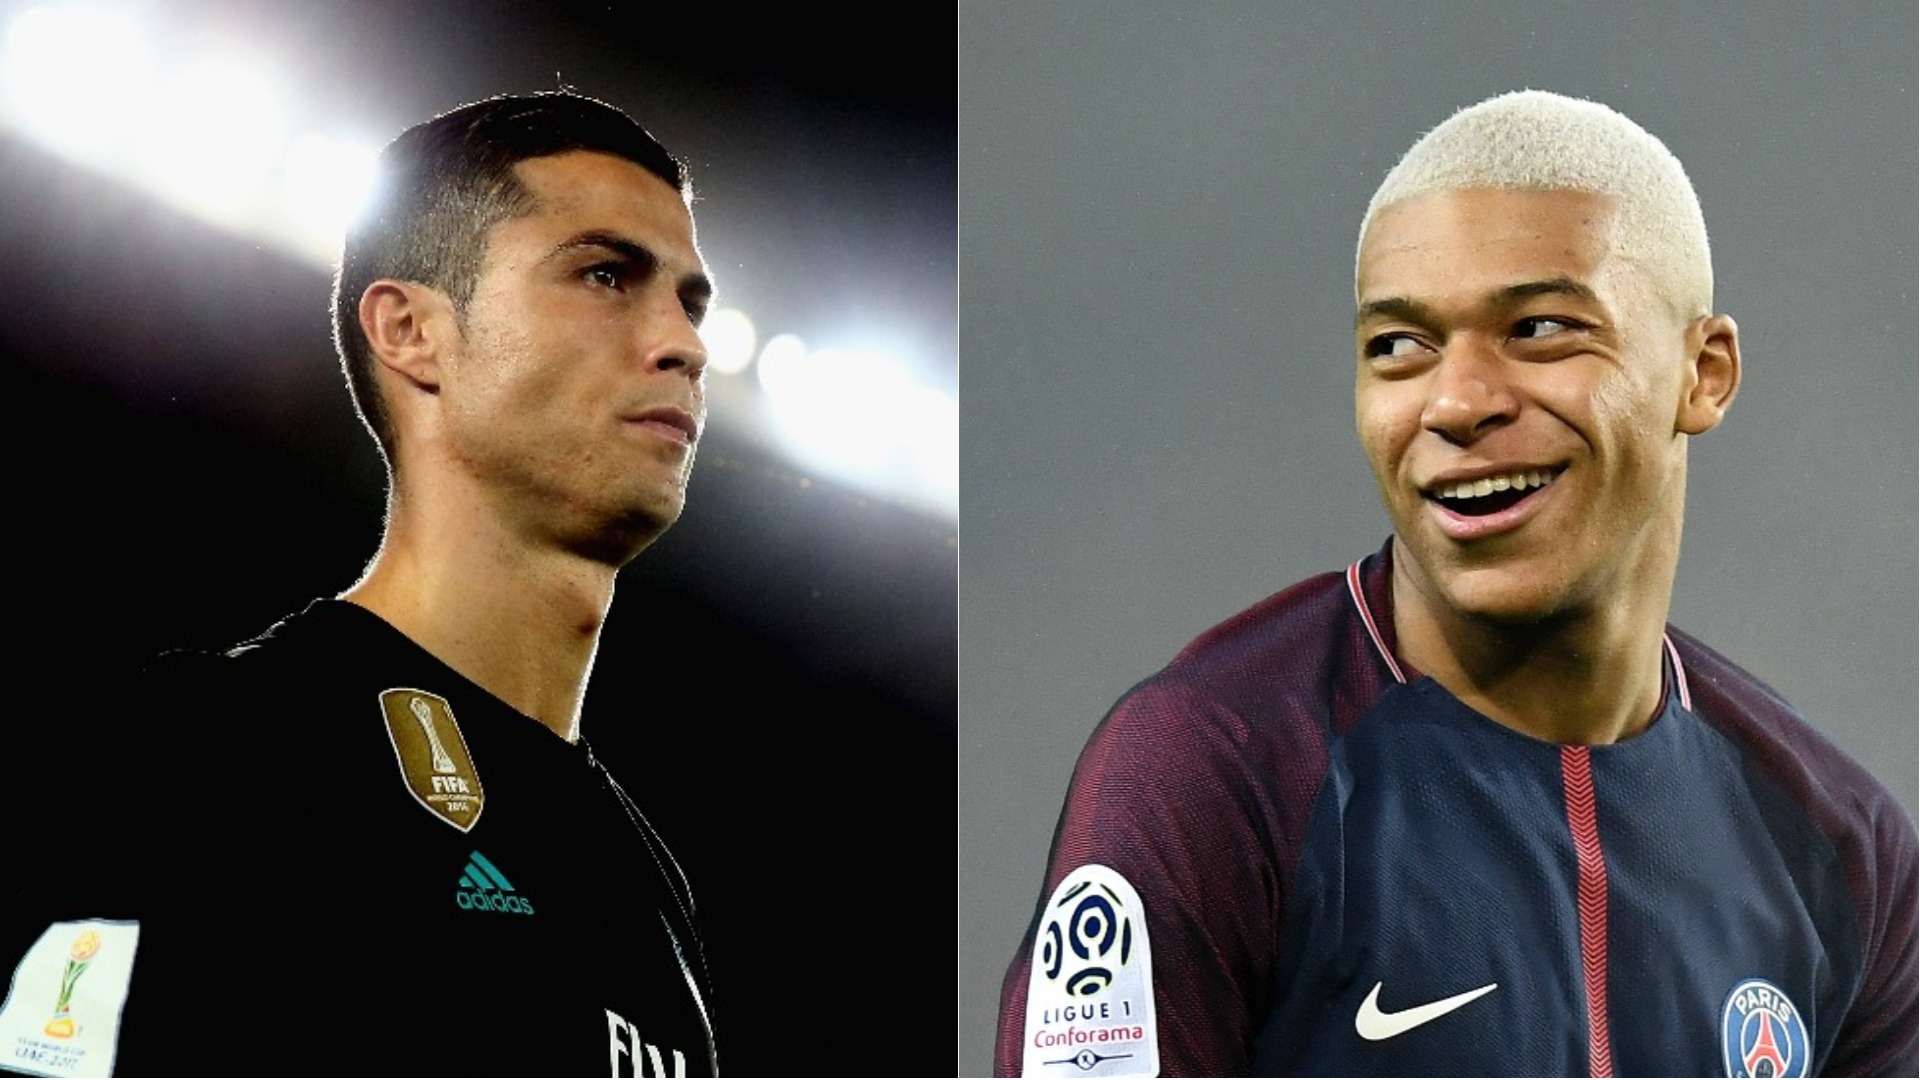 Mbappe excited to face 'hero' Ronaldo and 'icon' Zidane